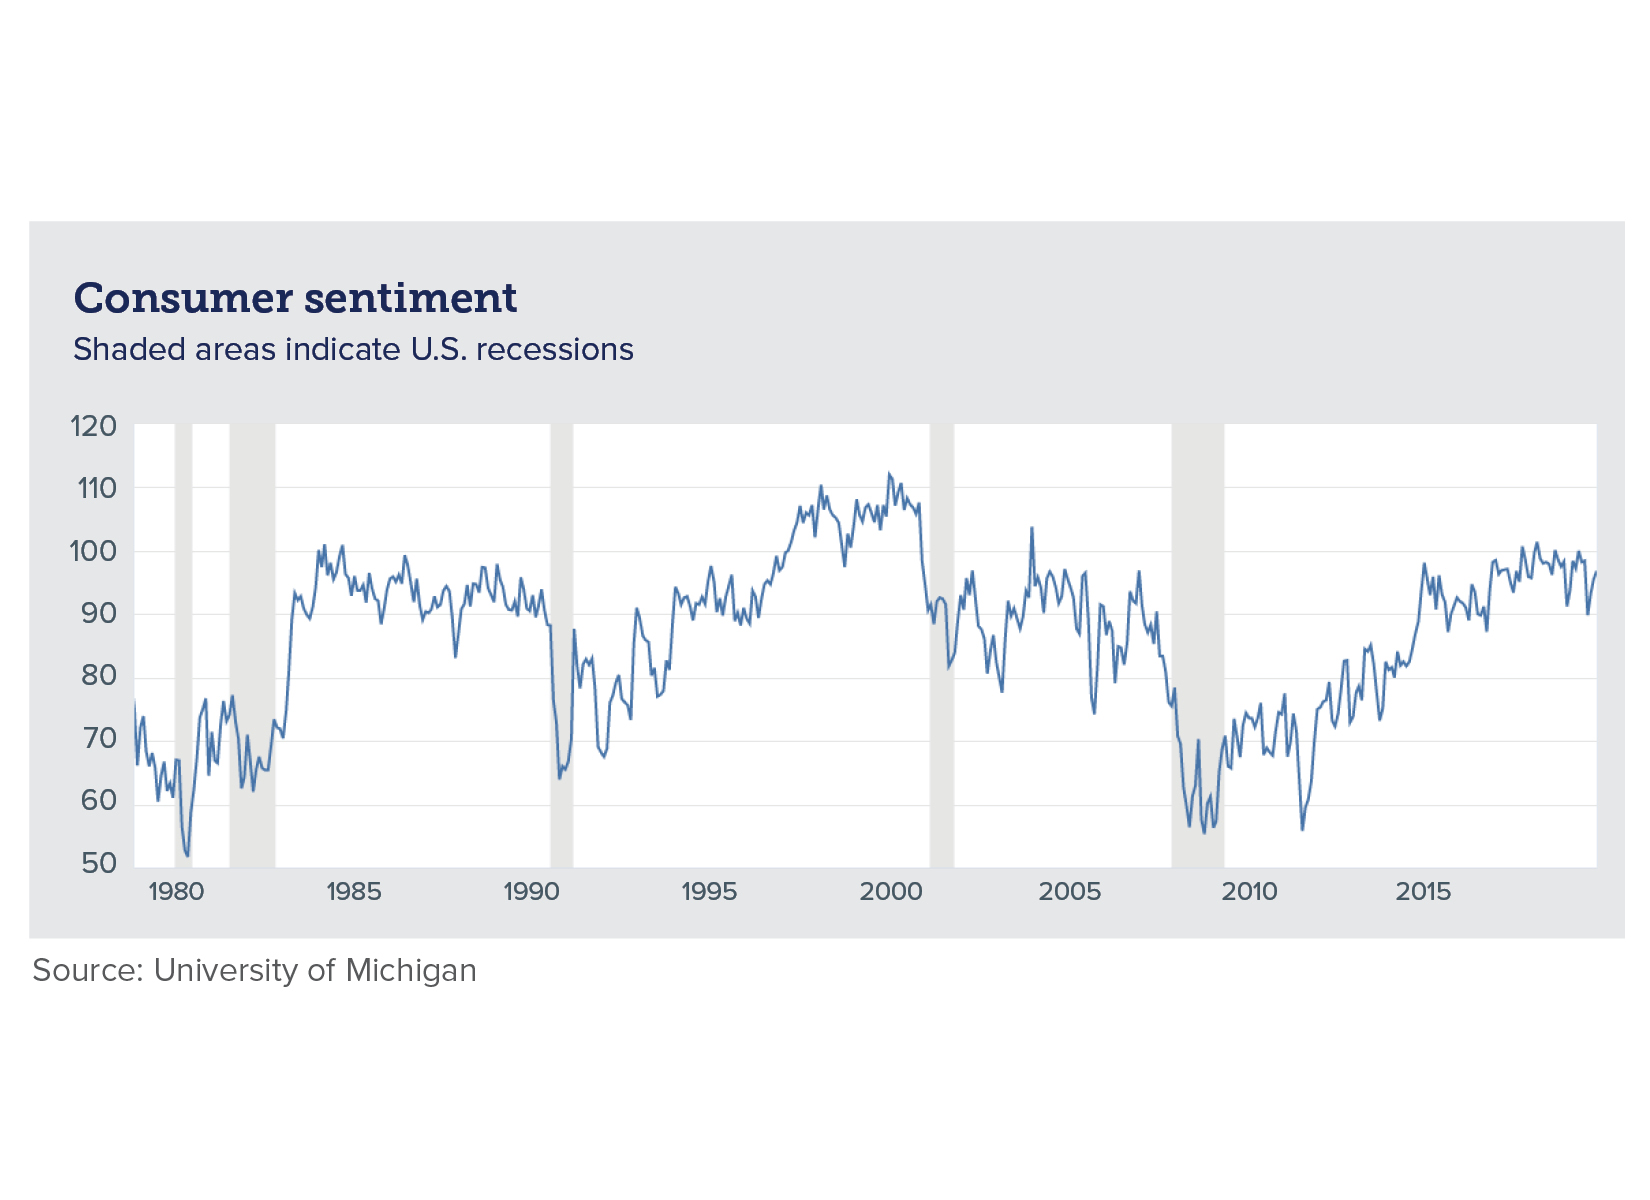 Chart of consumer sentiment over time